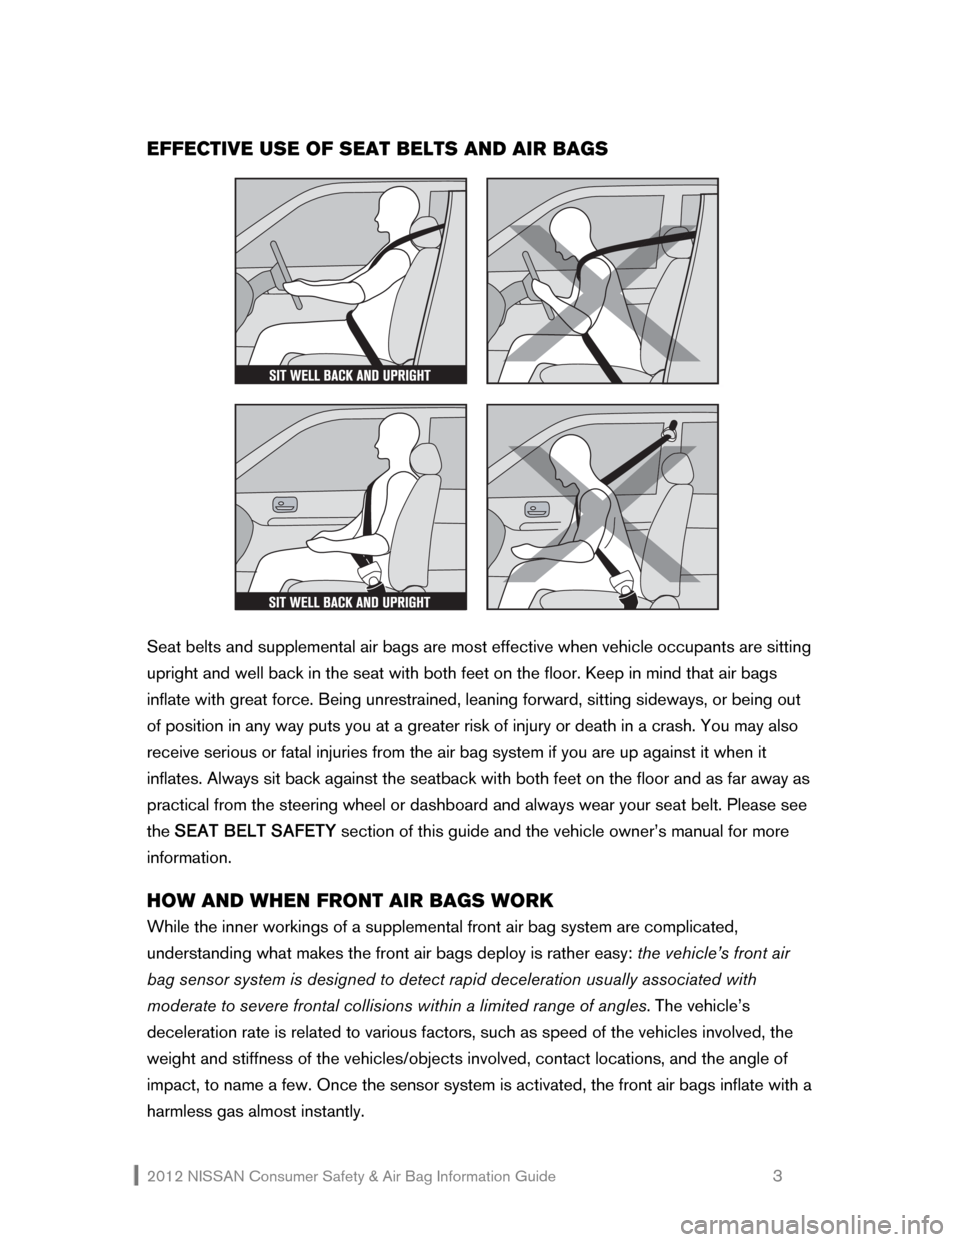 NISSAN XTERRA 2012 N50 / 2.G Consumer Safety Air Bag Information Guide 2012 NISSAN Consumer Safety & Air Bag Information Guide                                                   3 
EFFECTIVE USE OF SEAT BELTS AND AIR BAGS 
 
 
 
Seat belts and supplemental air bags are mo